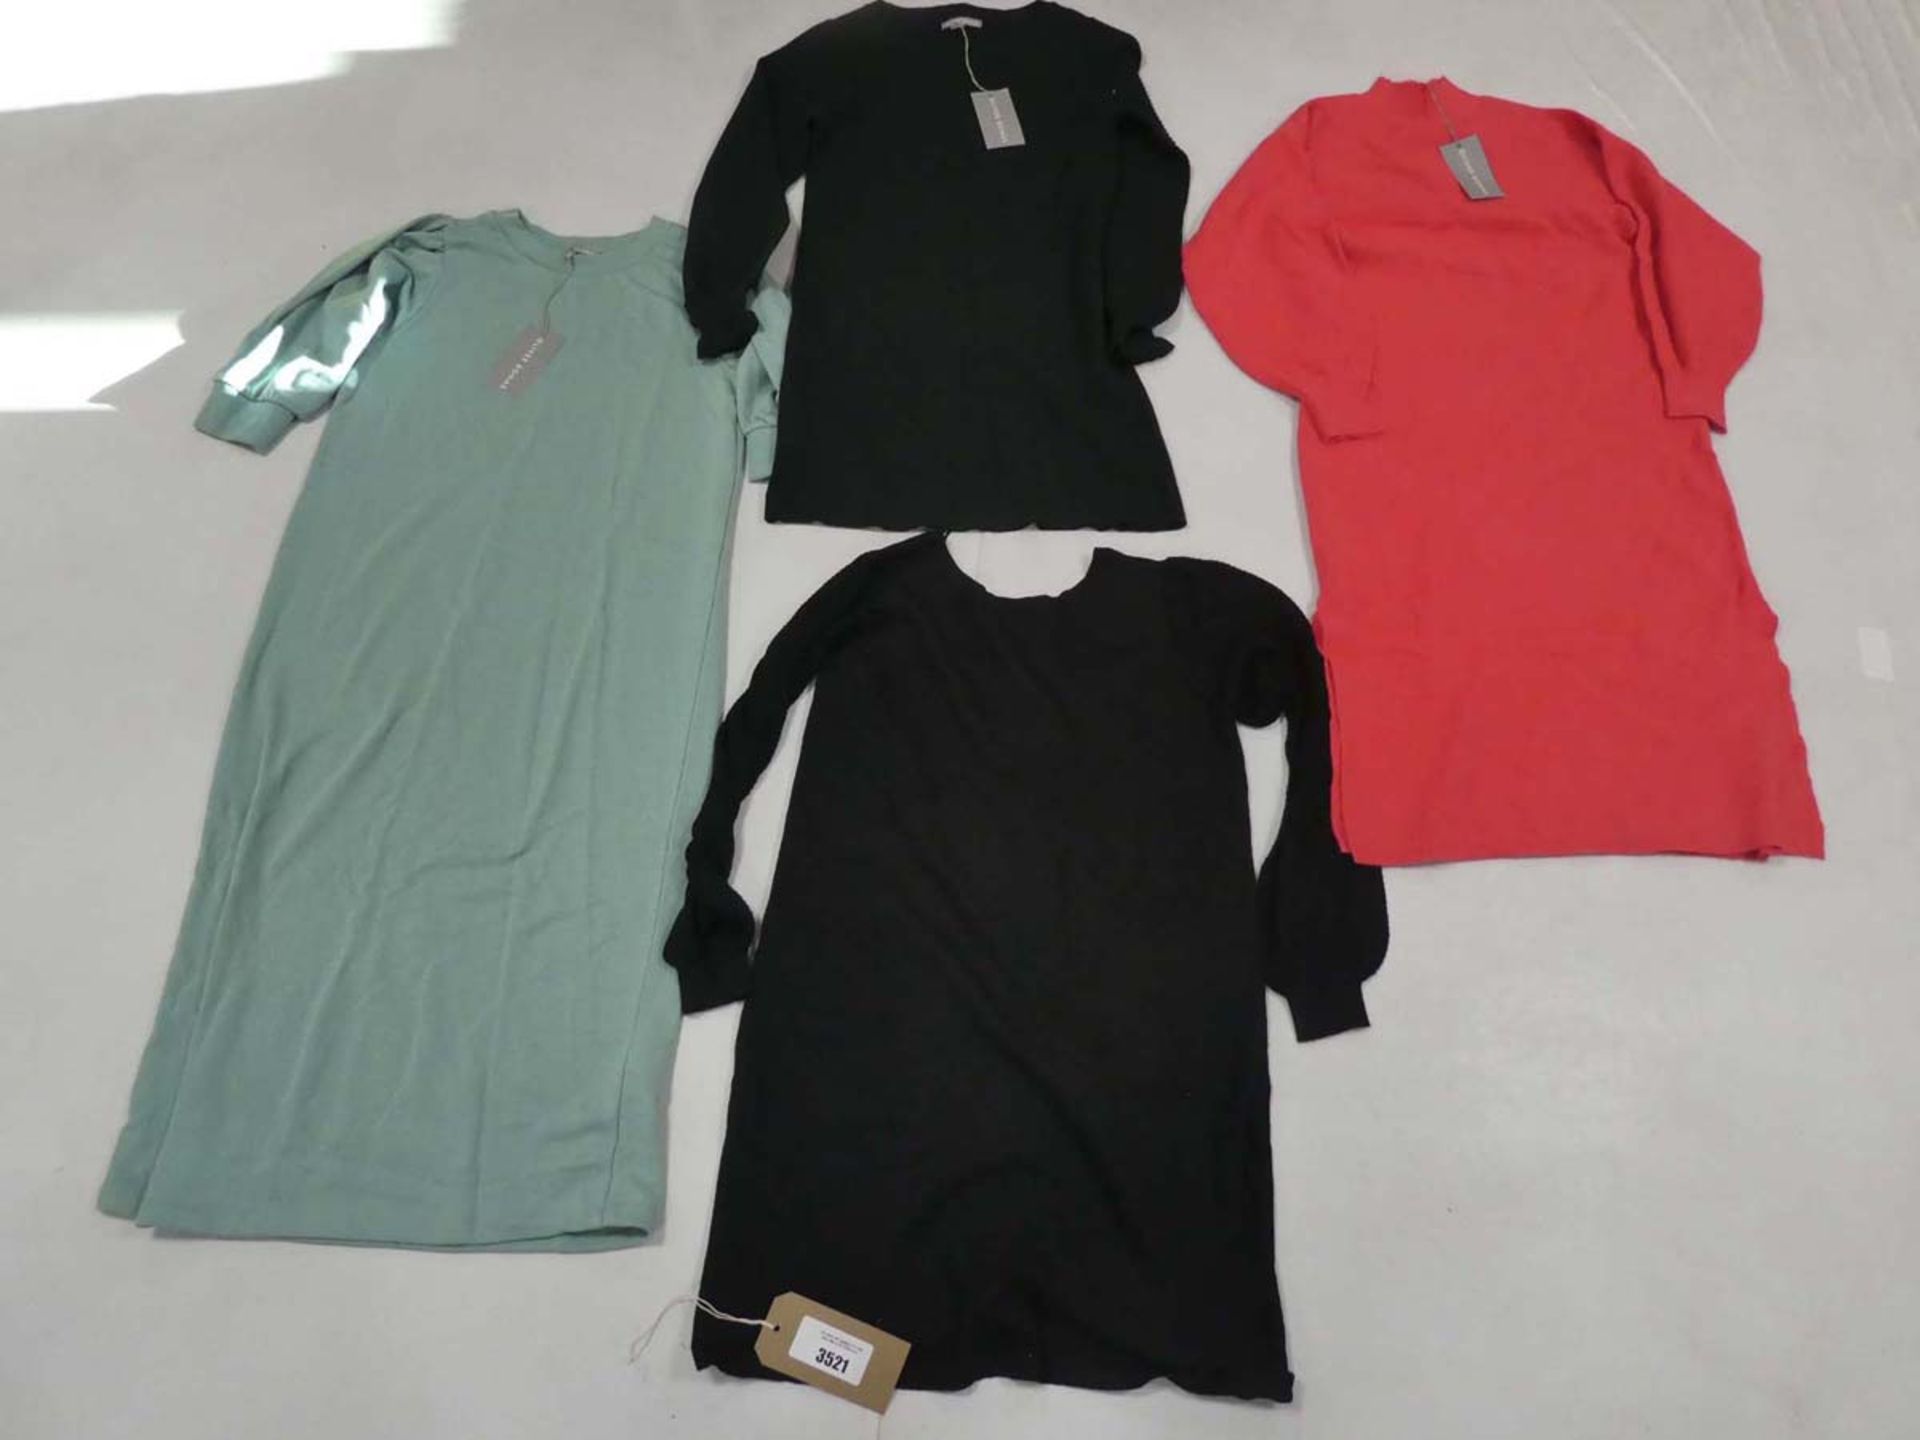 Selection of Oliver Bonas ladies dresses in various styles sizes 10 and 12